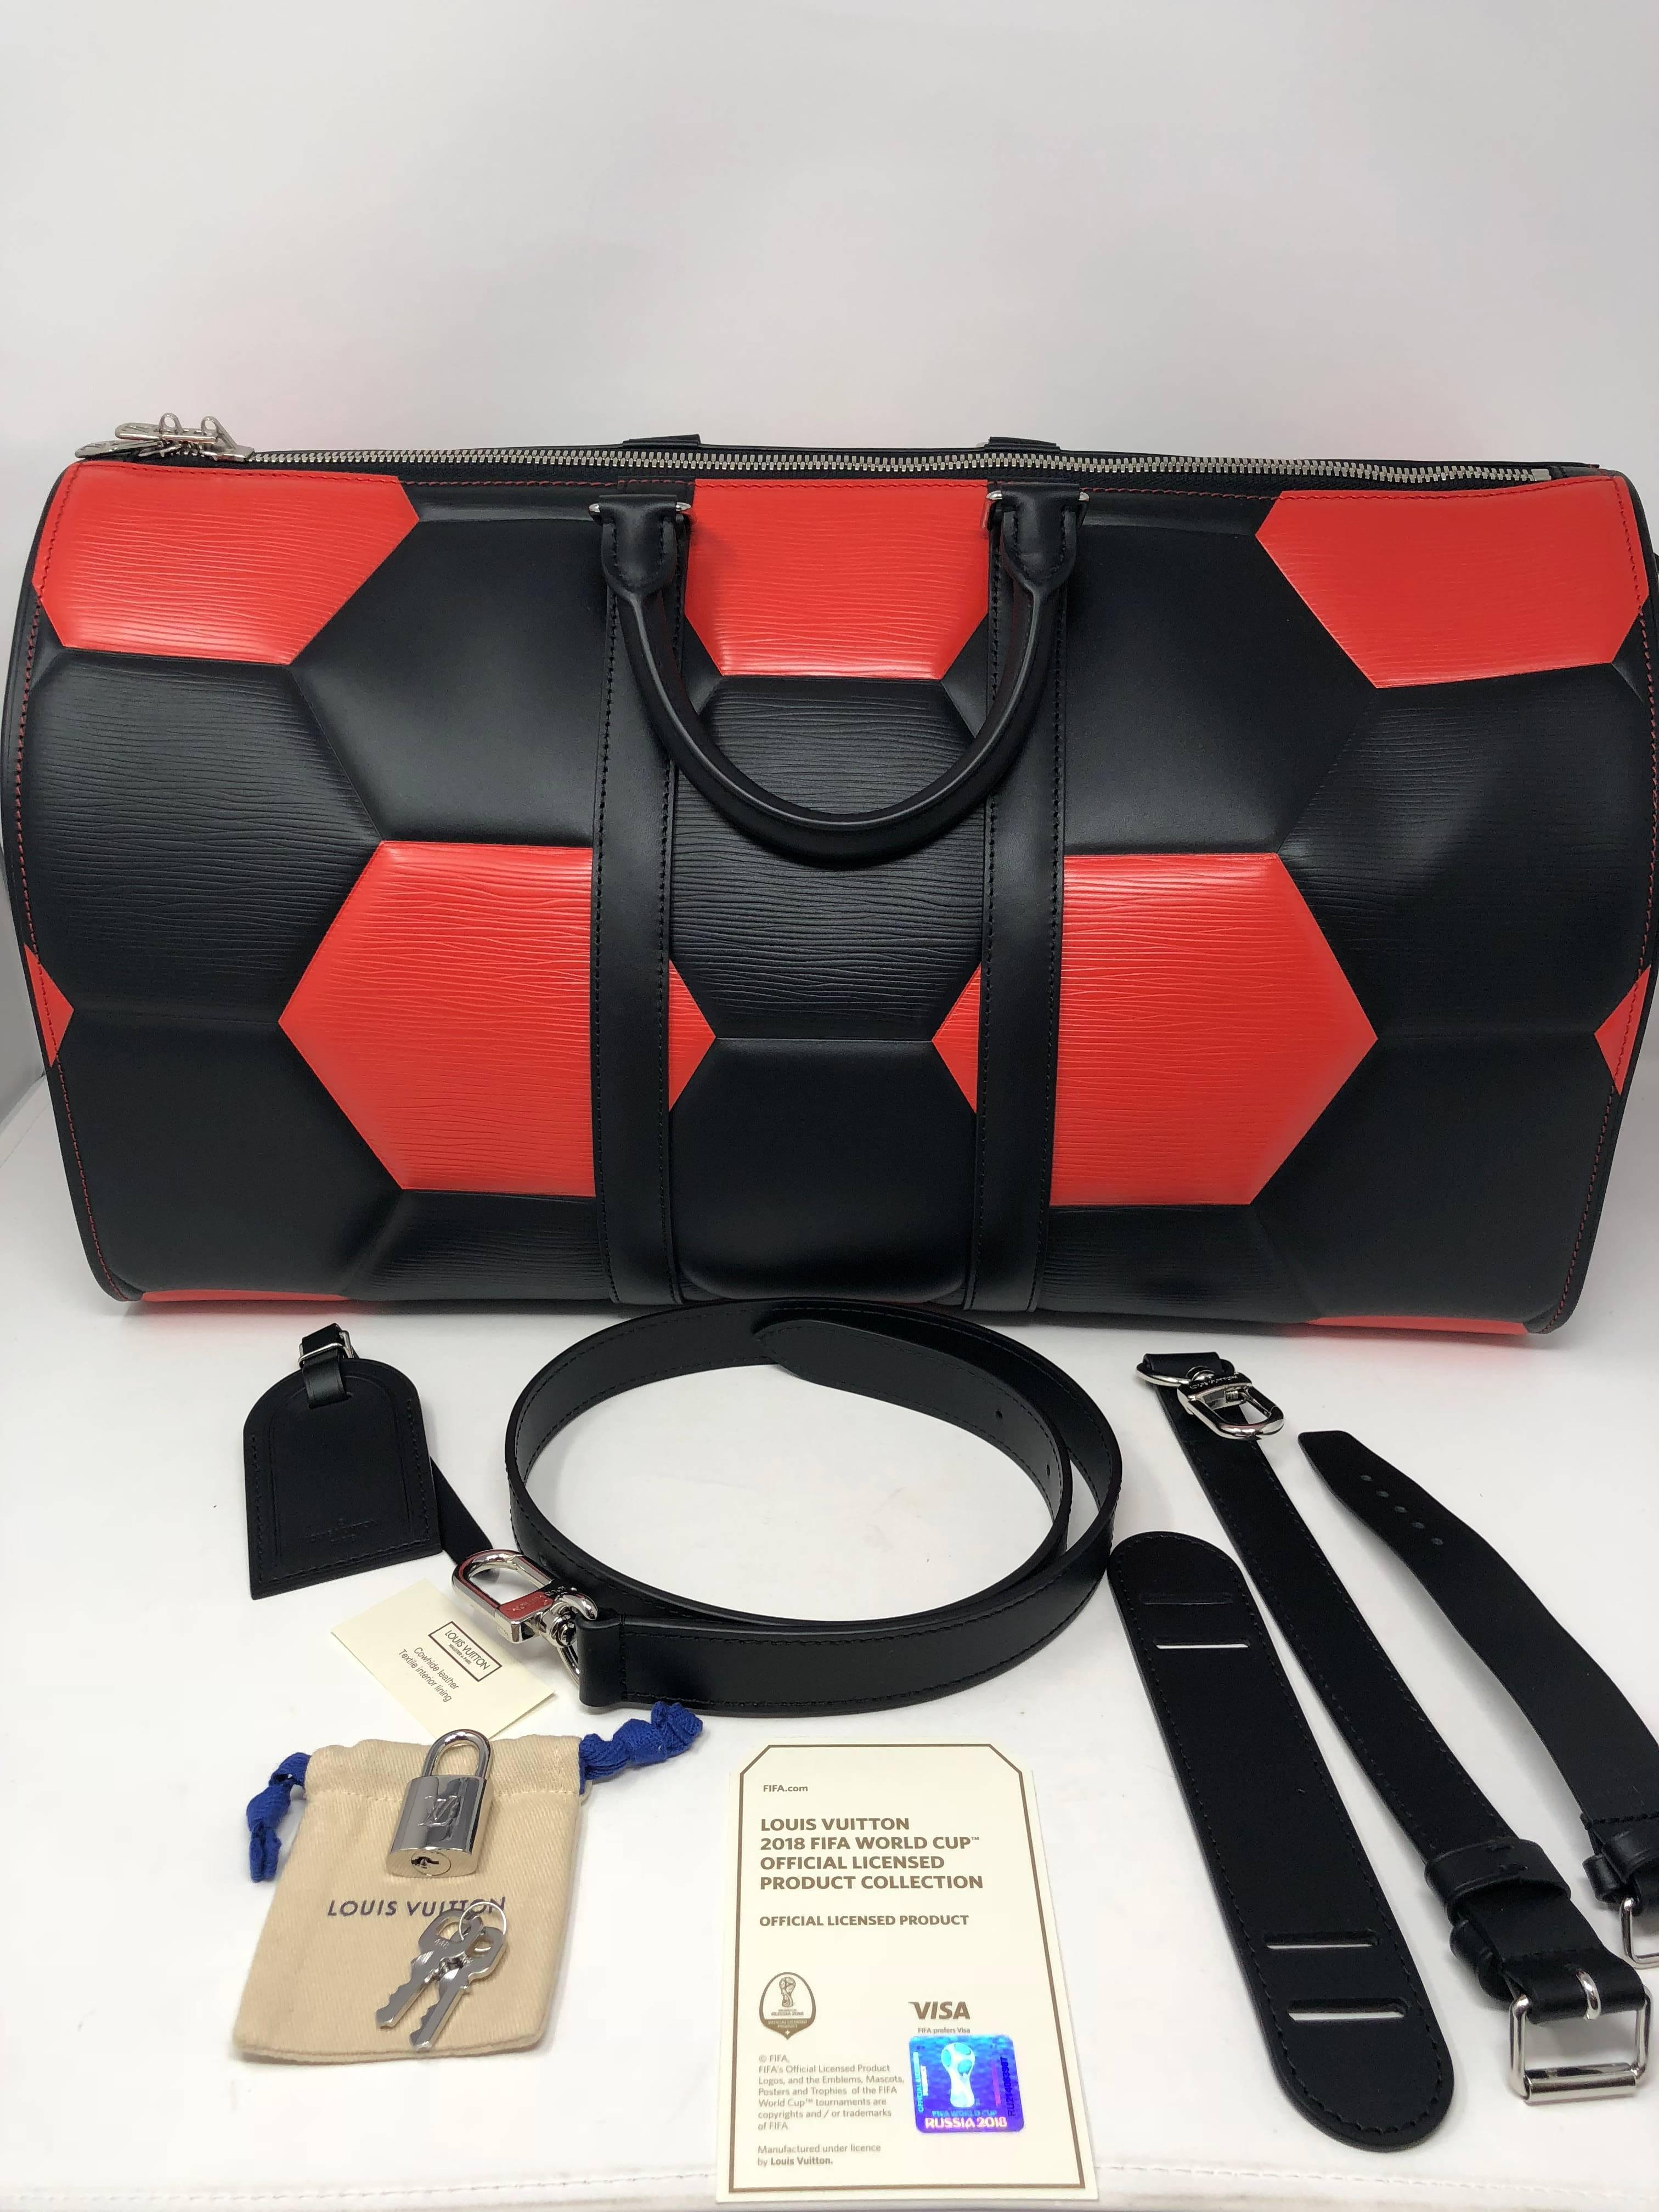 Louis Vuitton Keepall Bandouliere 50 Special Order FIFA World Cup Collection. Custom order of red and black combination. May be the only one in the world. Special collaboration with FIFA and LV to create this soccer ball effect in a bag. This was an